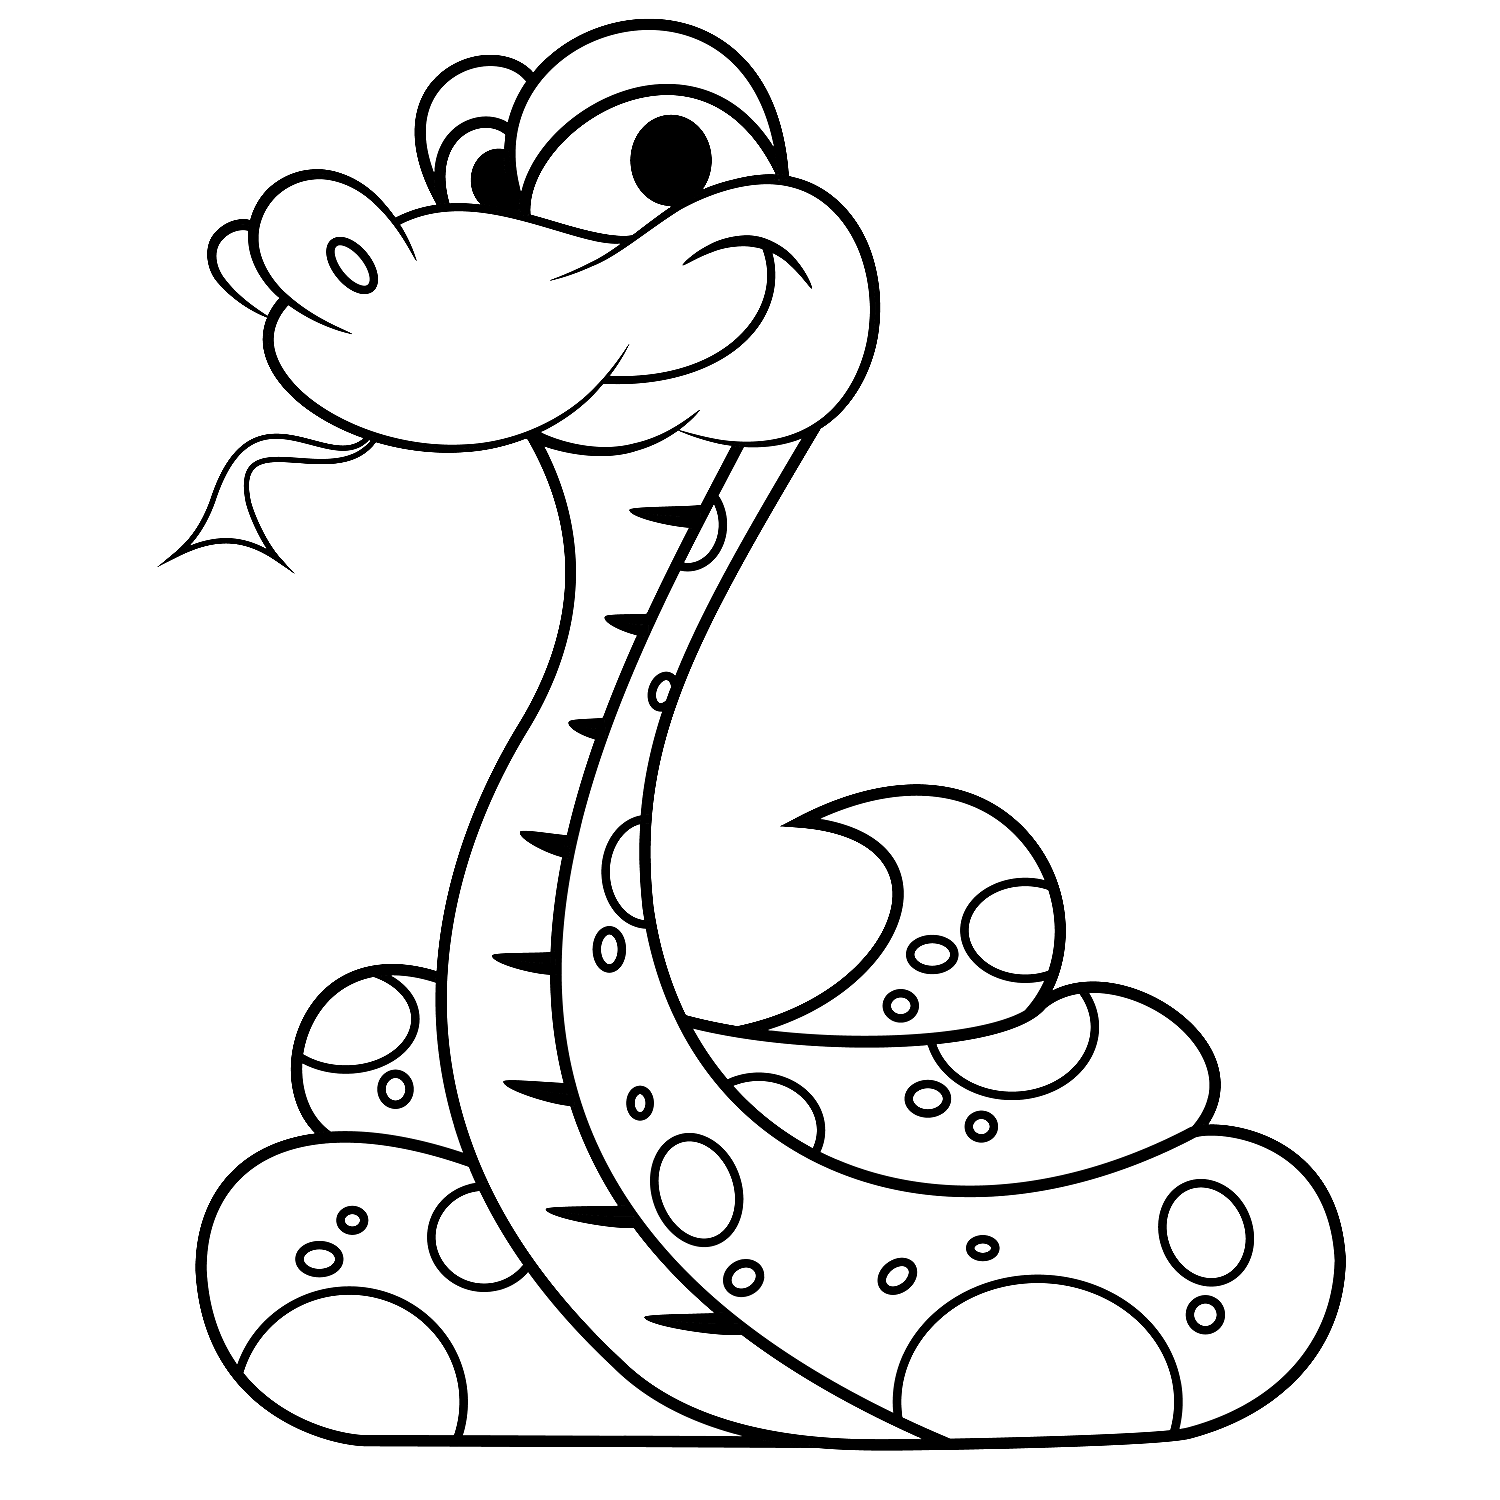 Cute Snake Coloring Pages Free : New Coloring Pages